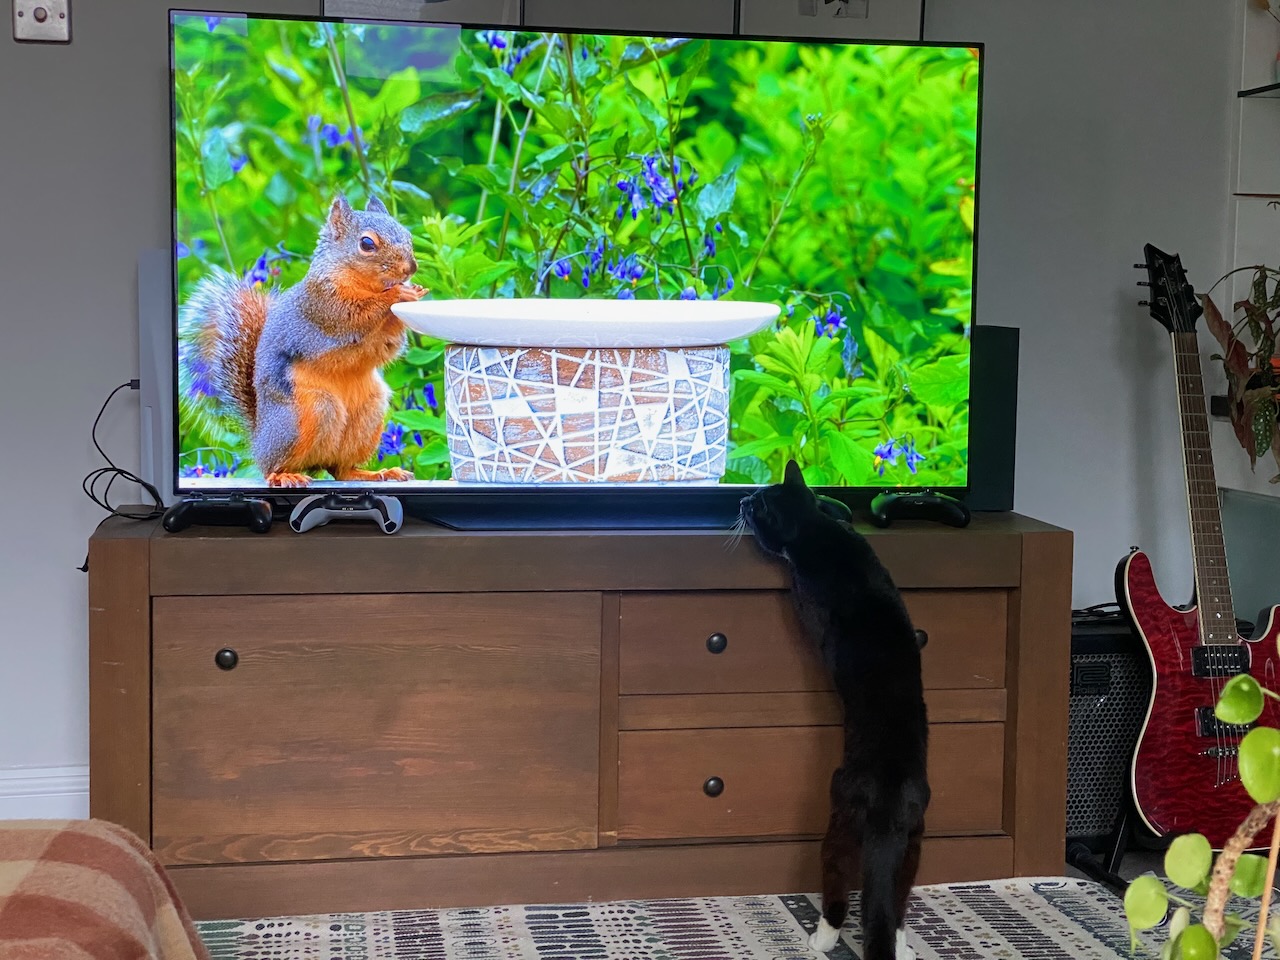 A black cat watching a squirrel on a TV, right before whacking it with her paw.